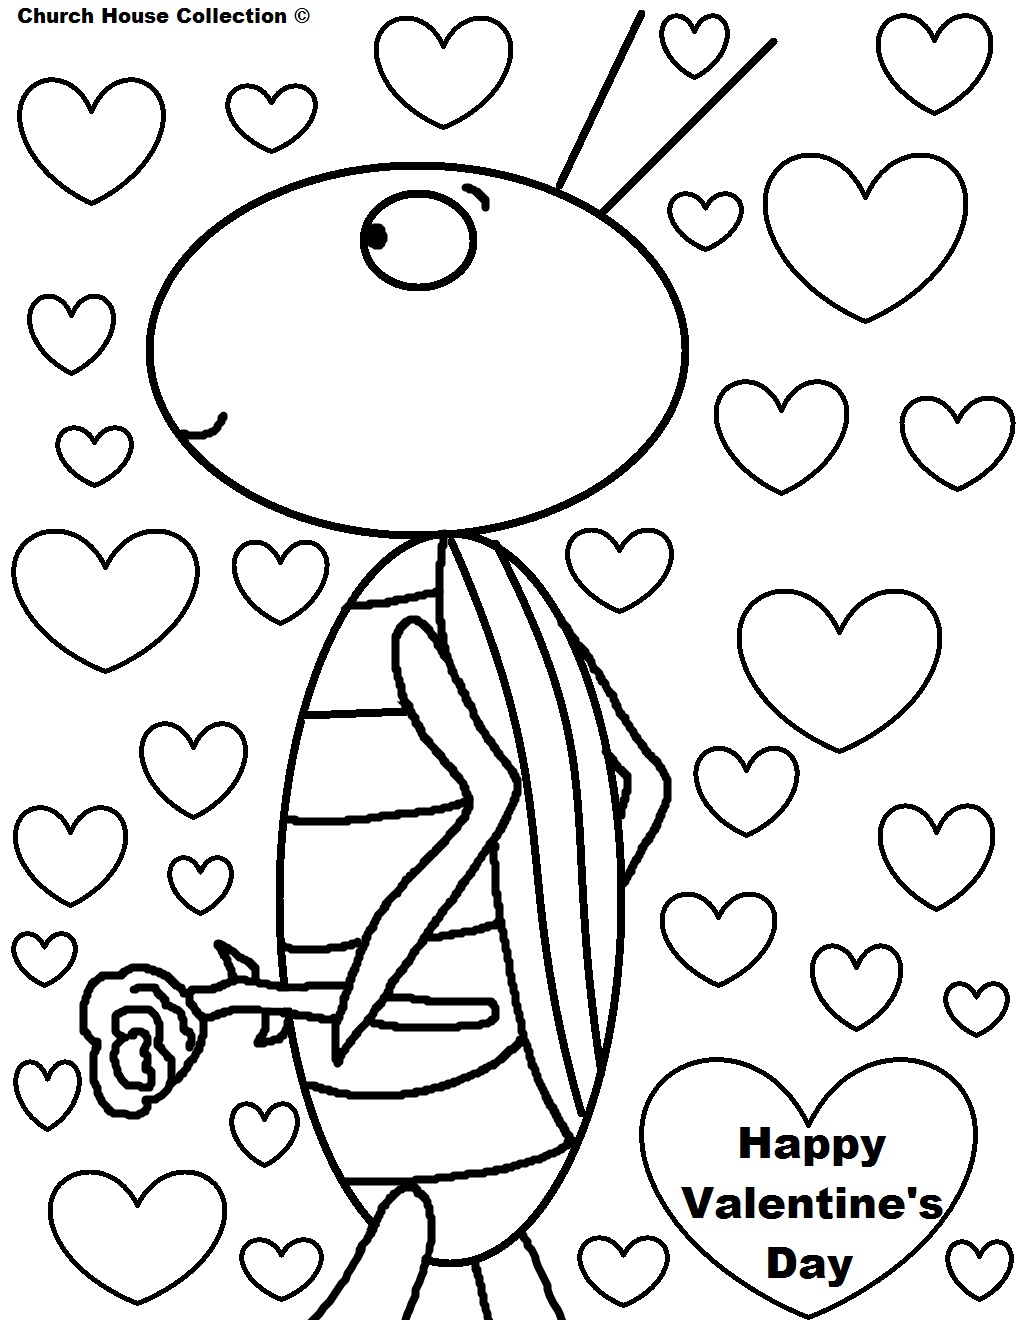 Church House Collection Blog Valentine s Day Coloring Pages For School Teachers